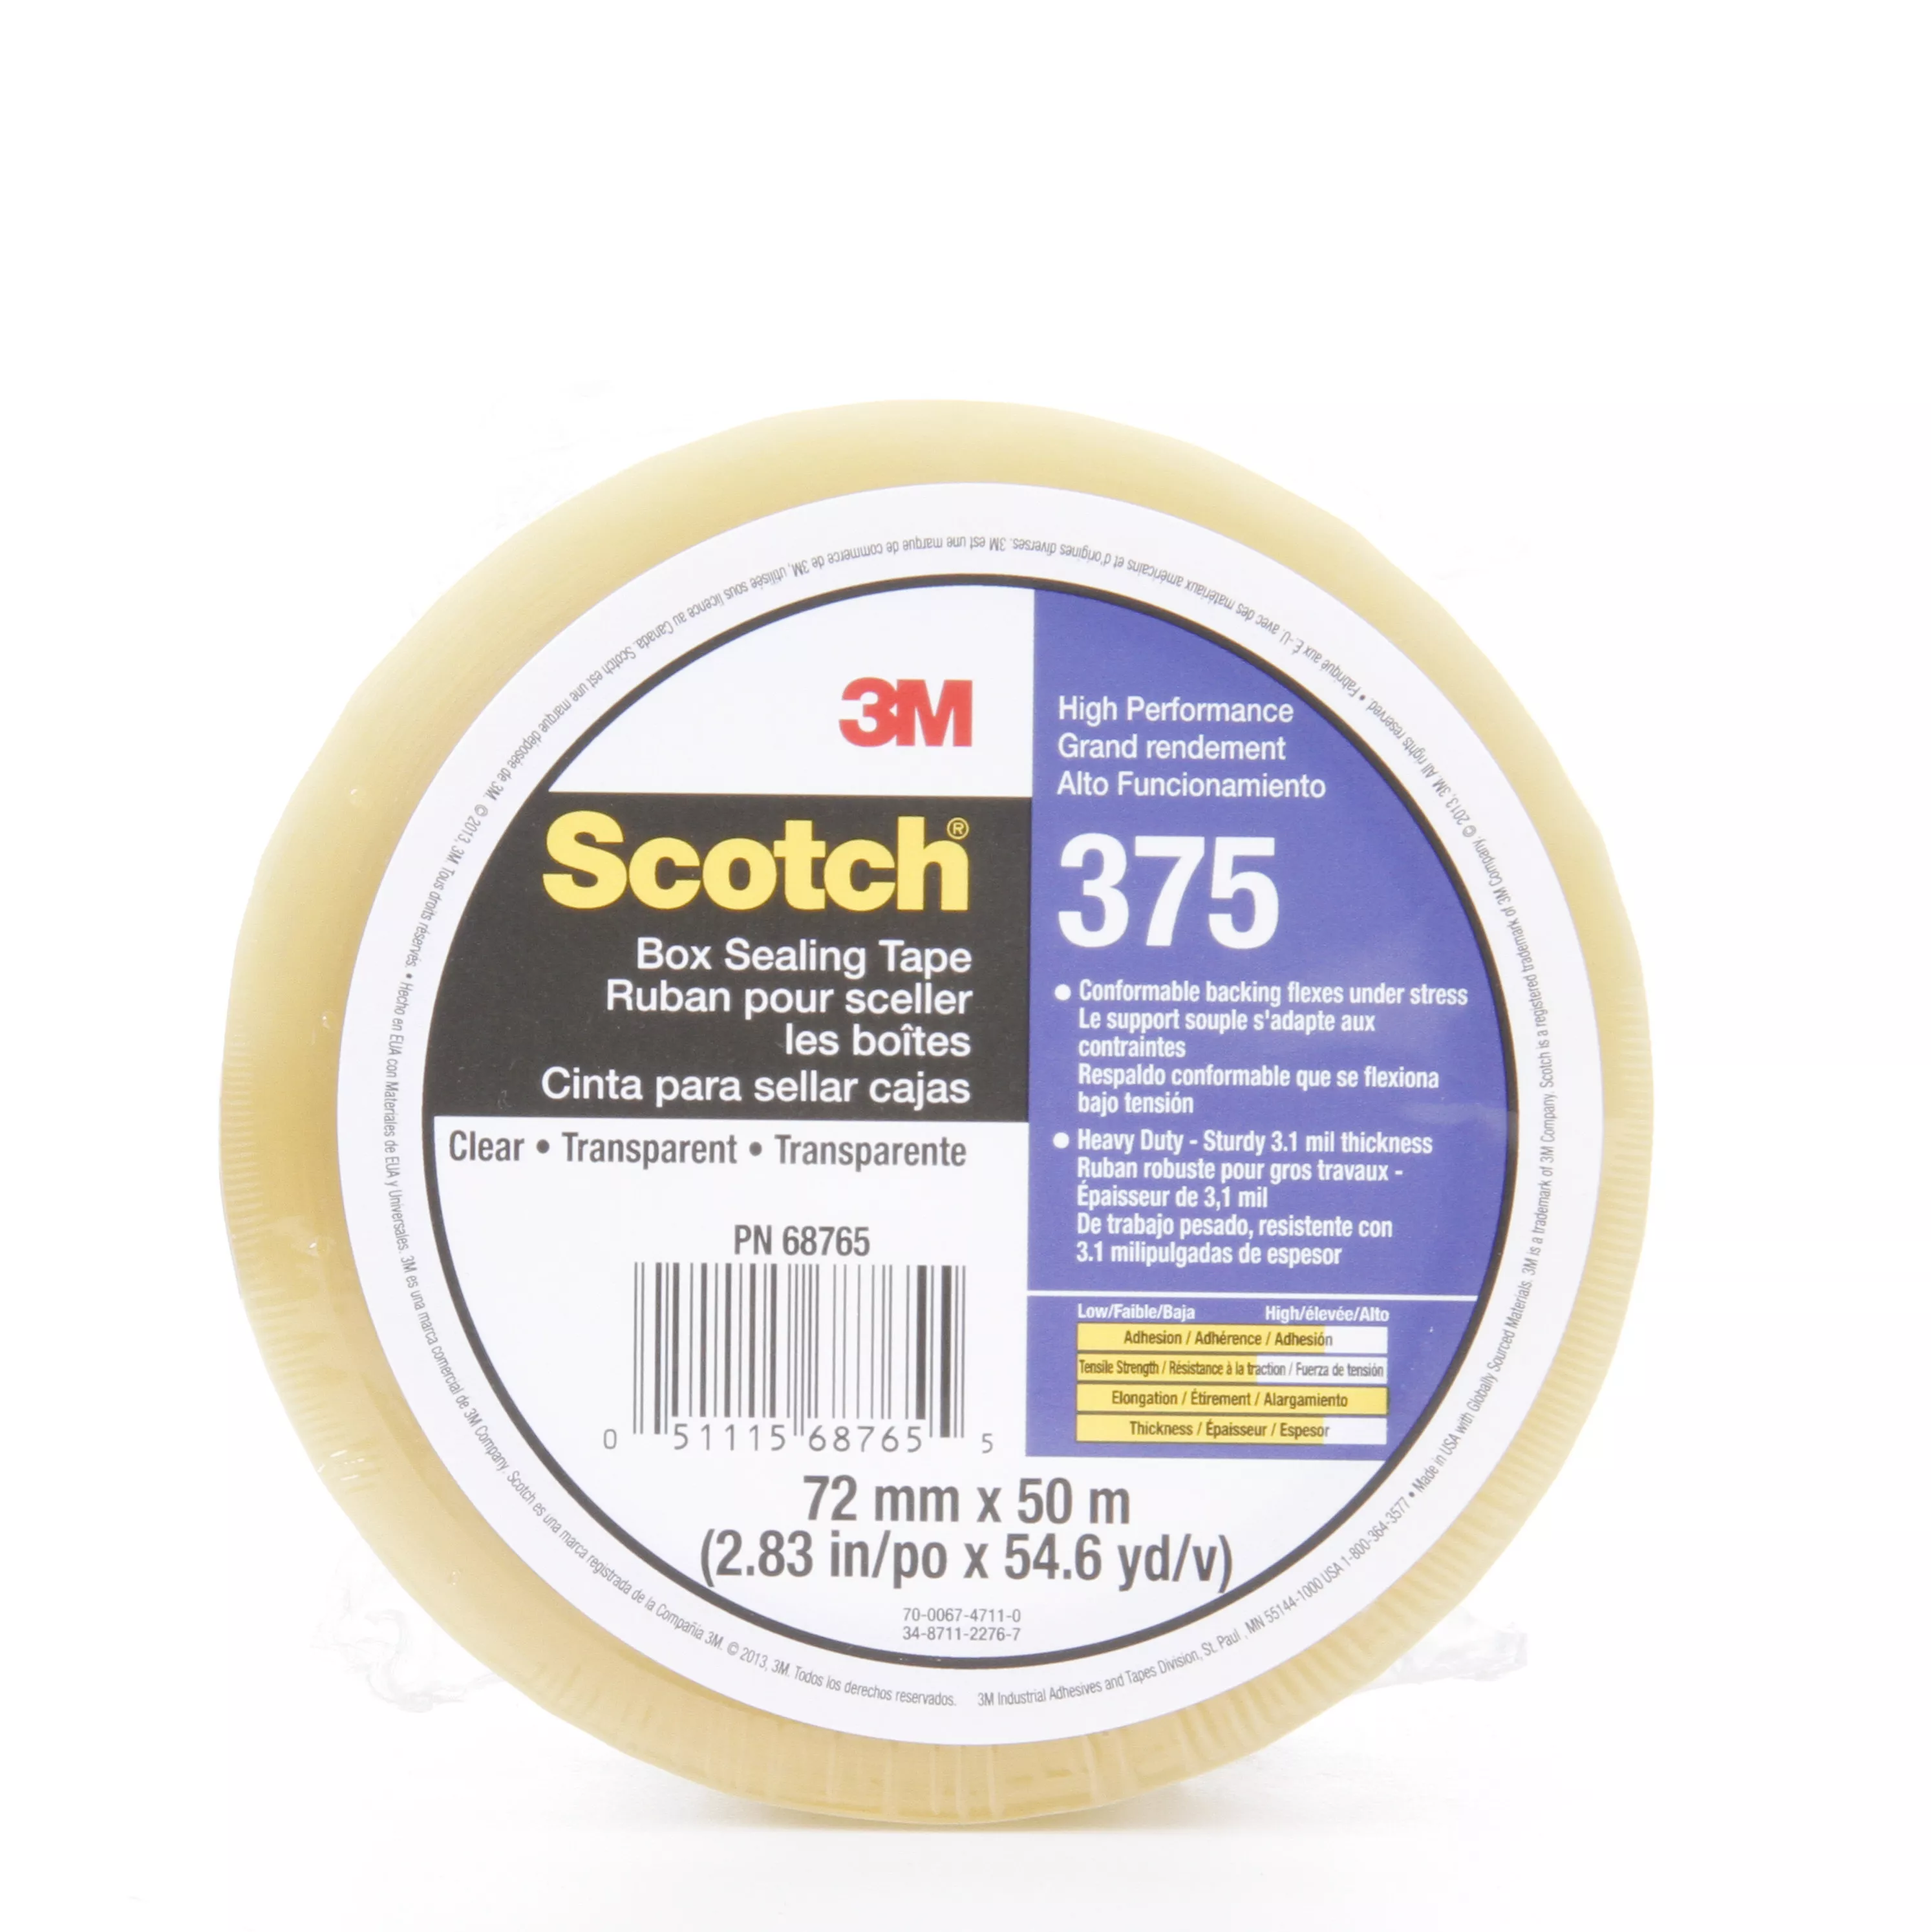 Scotch® Box Sealing Tape 375, Clear, 72 mm x 50 m, 24/Case, Individually
Wrapped Conveniently Packaged